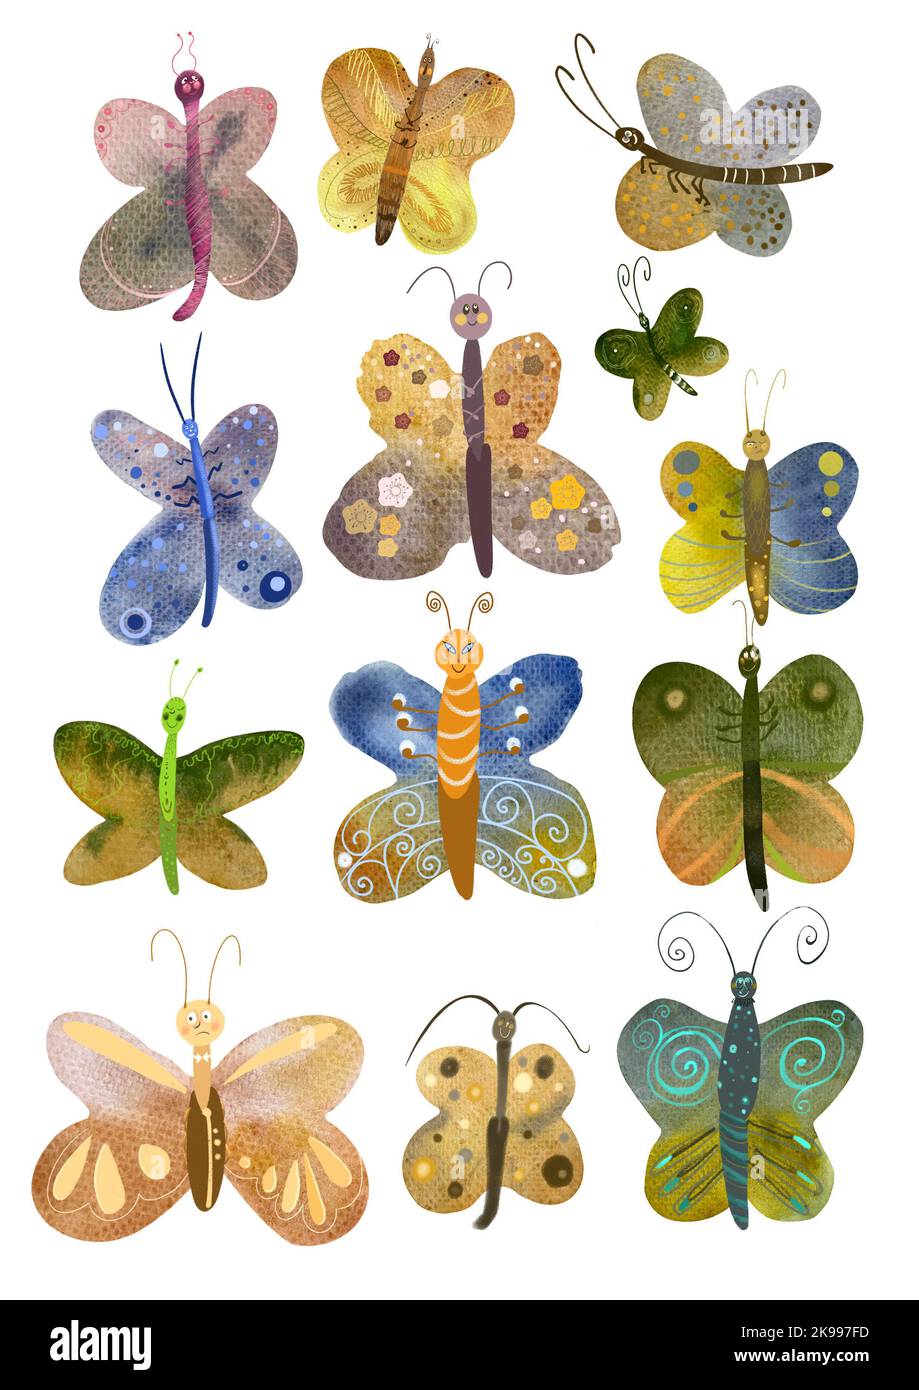 Autumn butterflies watercolor illustration collection isolated on white background Stock Photo